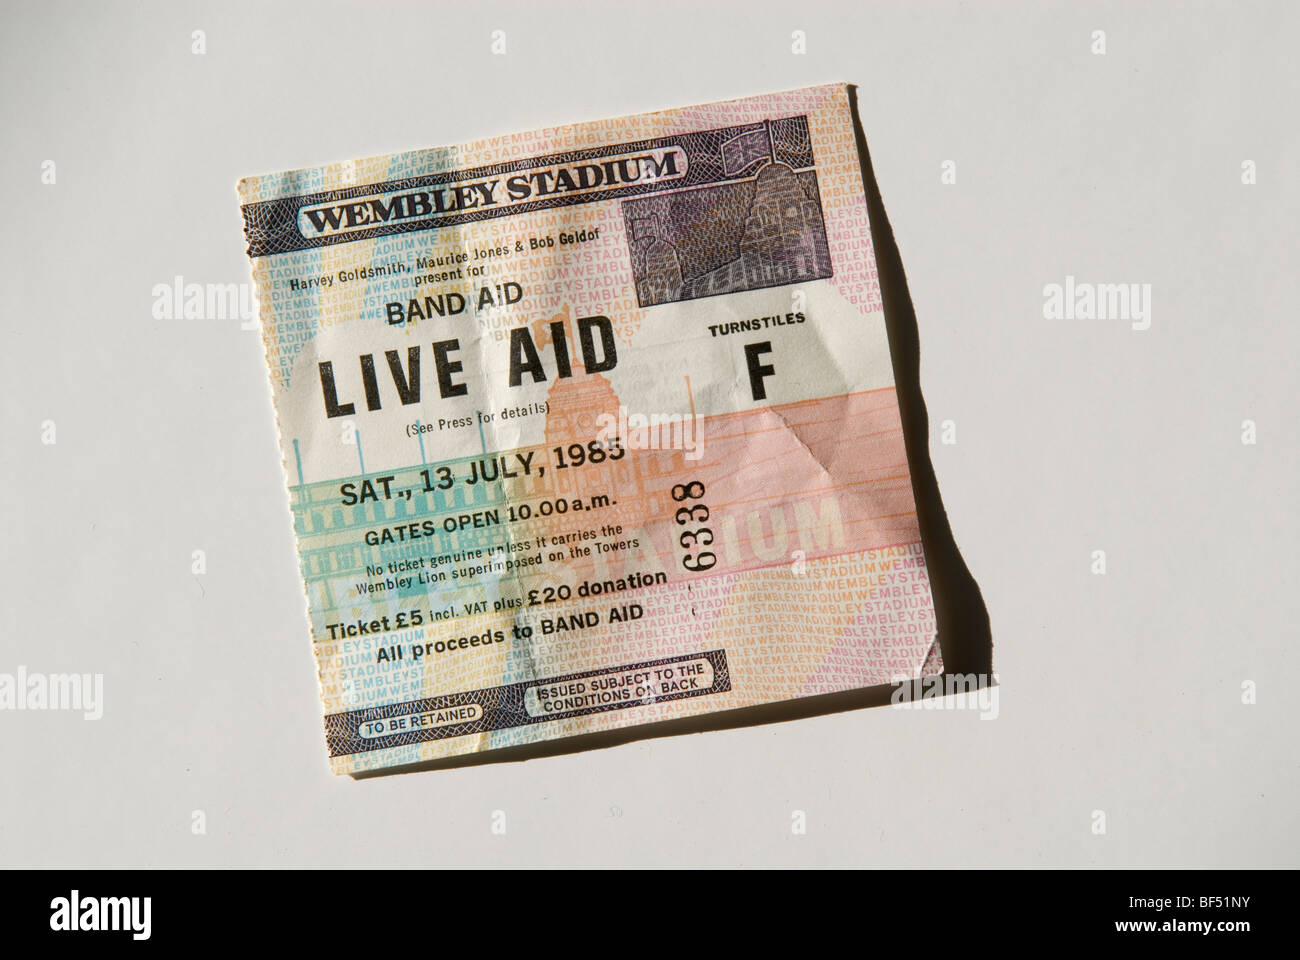 Live Aid ticket from 1985 Stock Photo